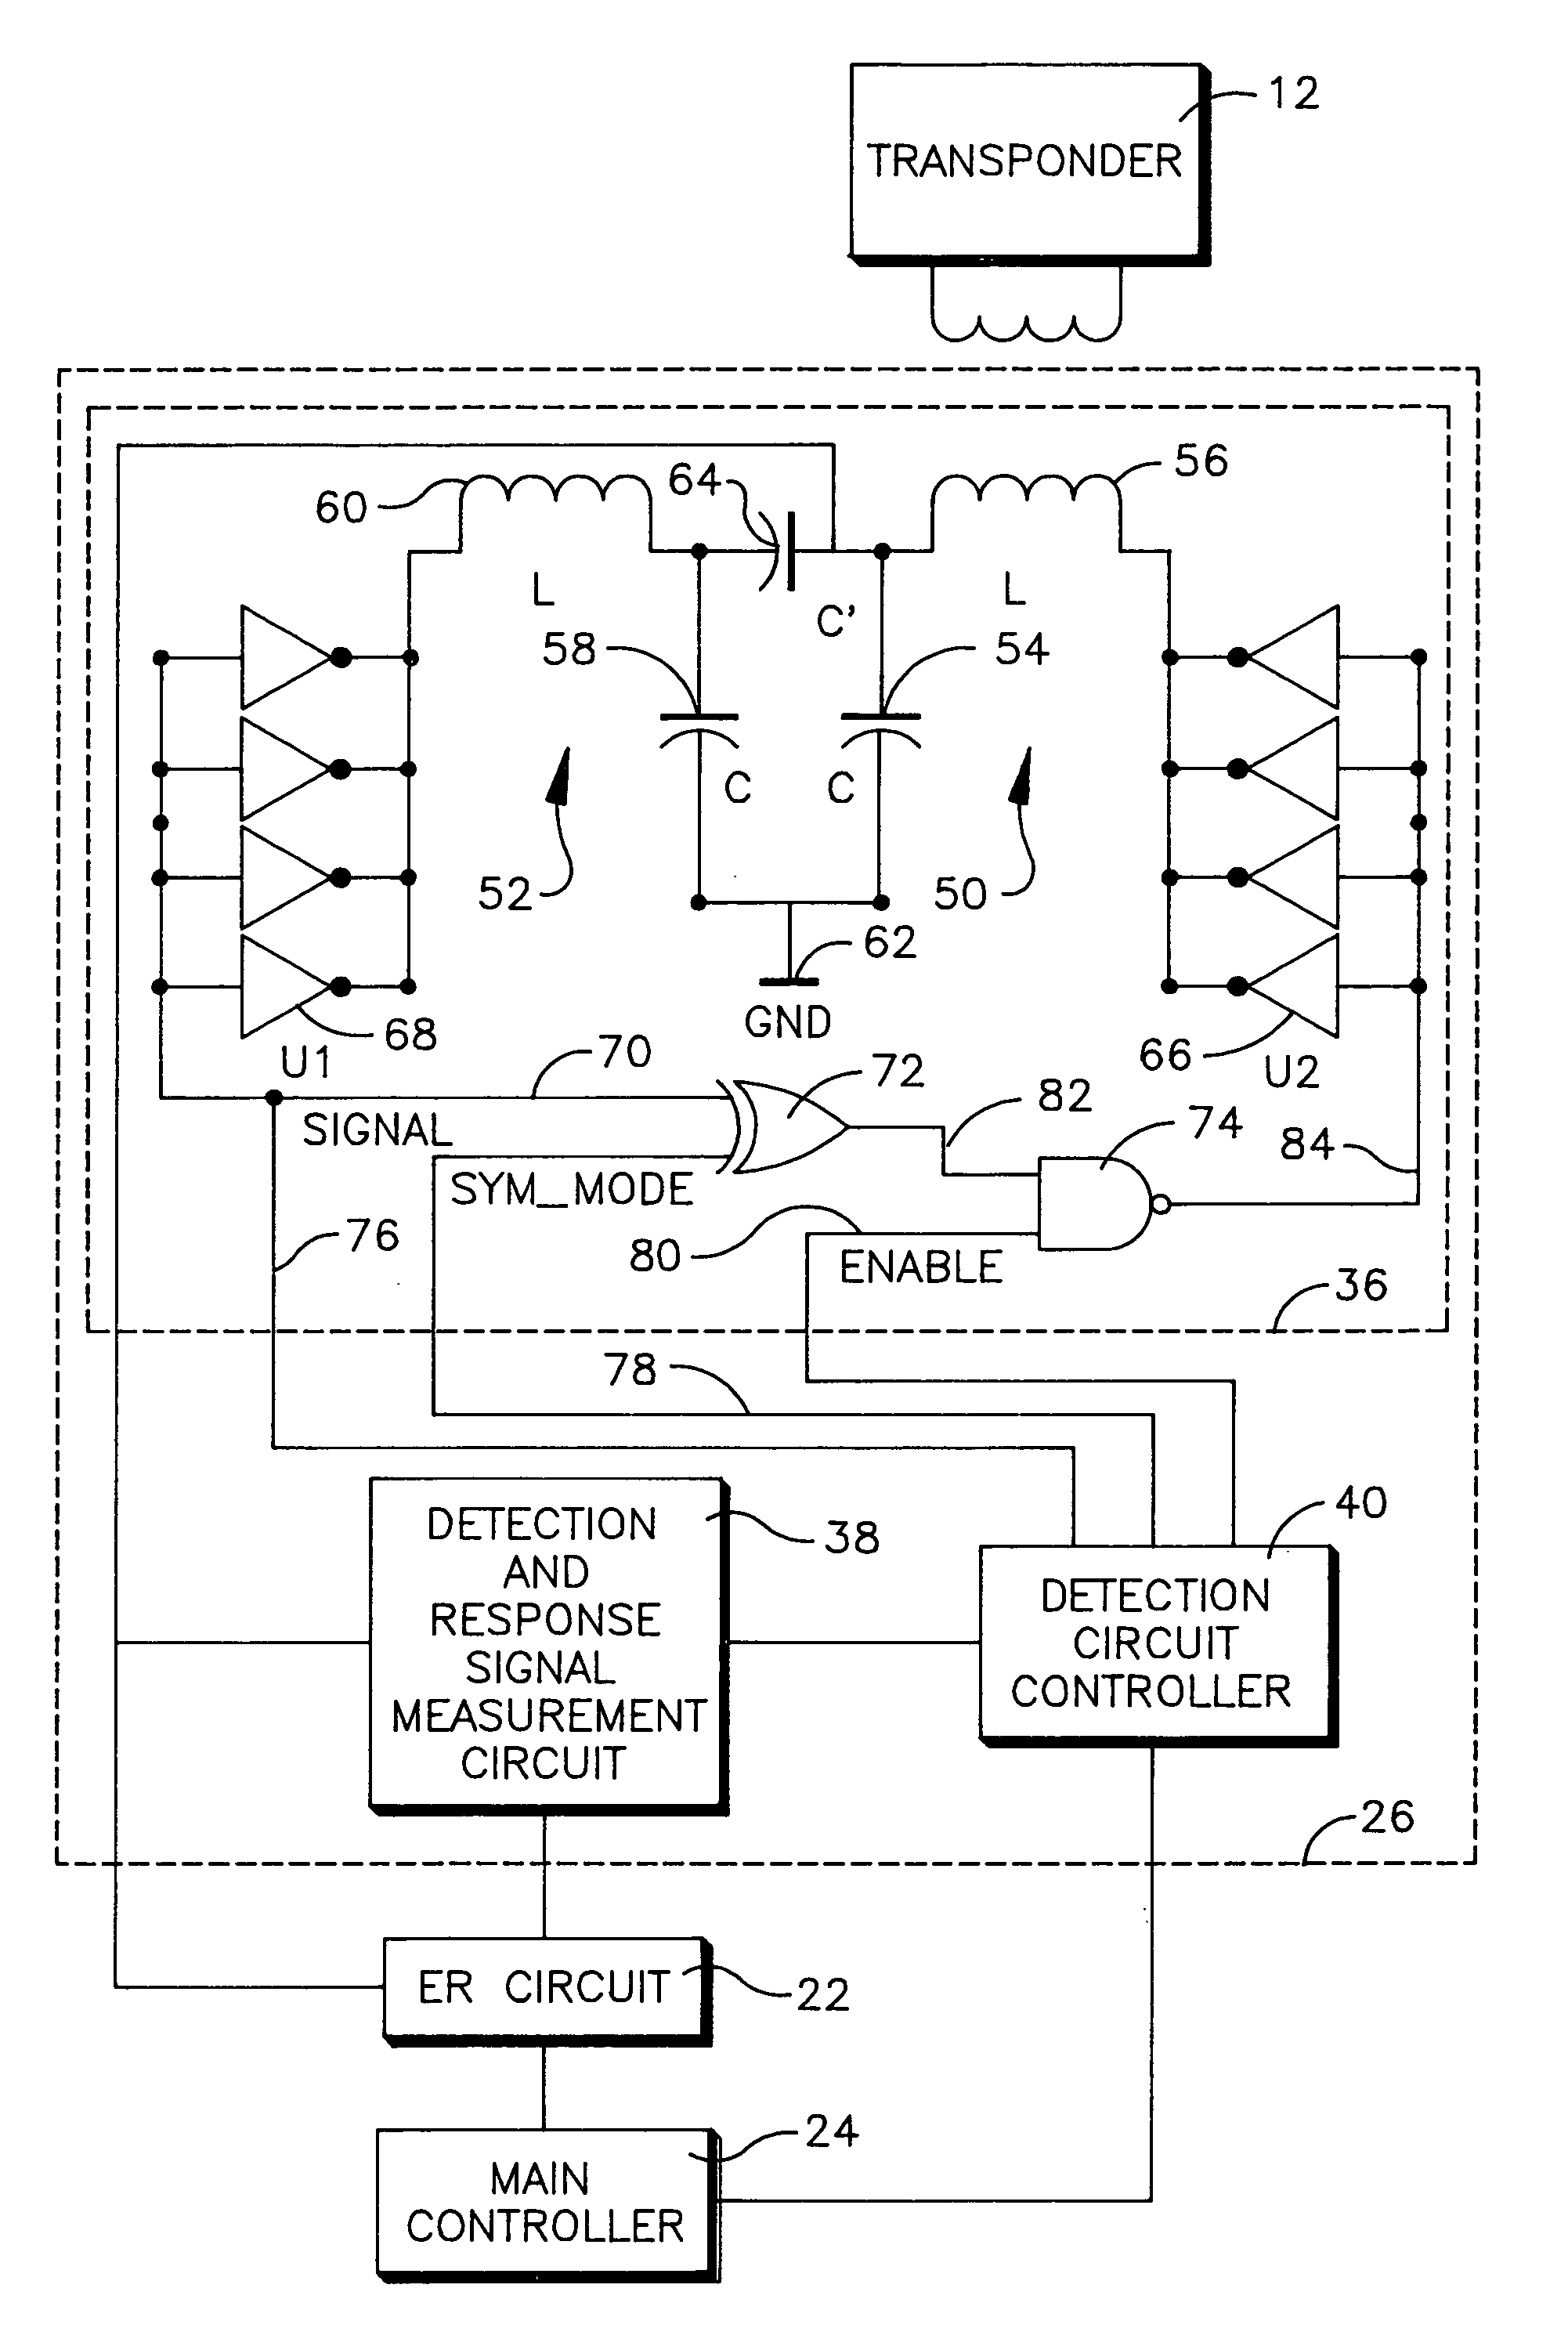 Detection signal generator circuit for an RFID reader